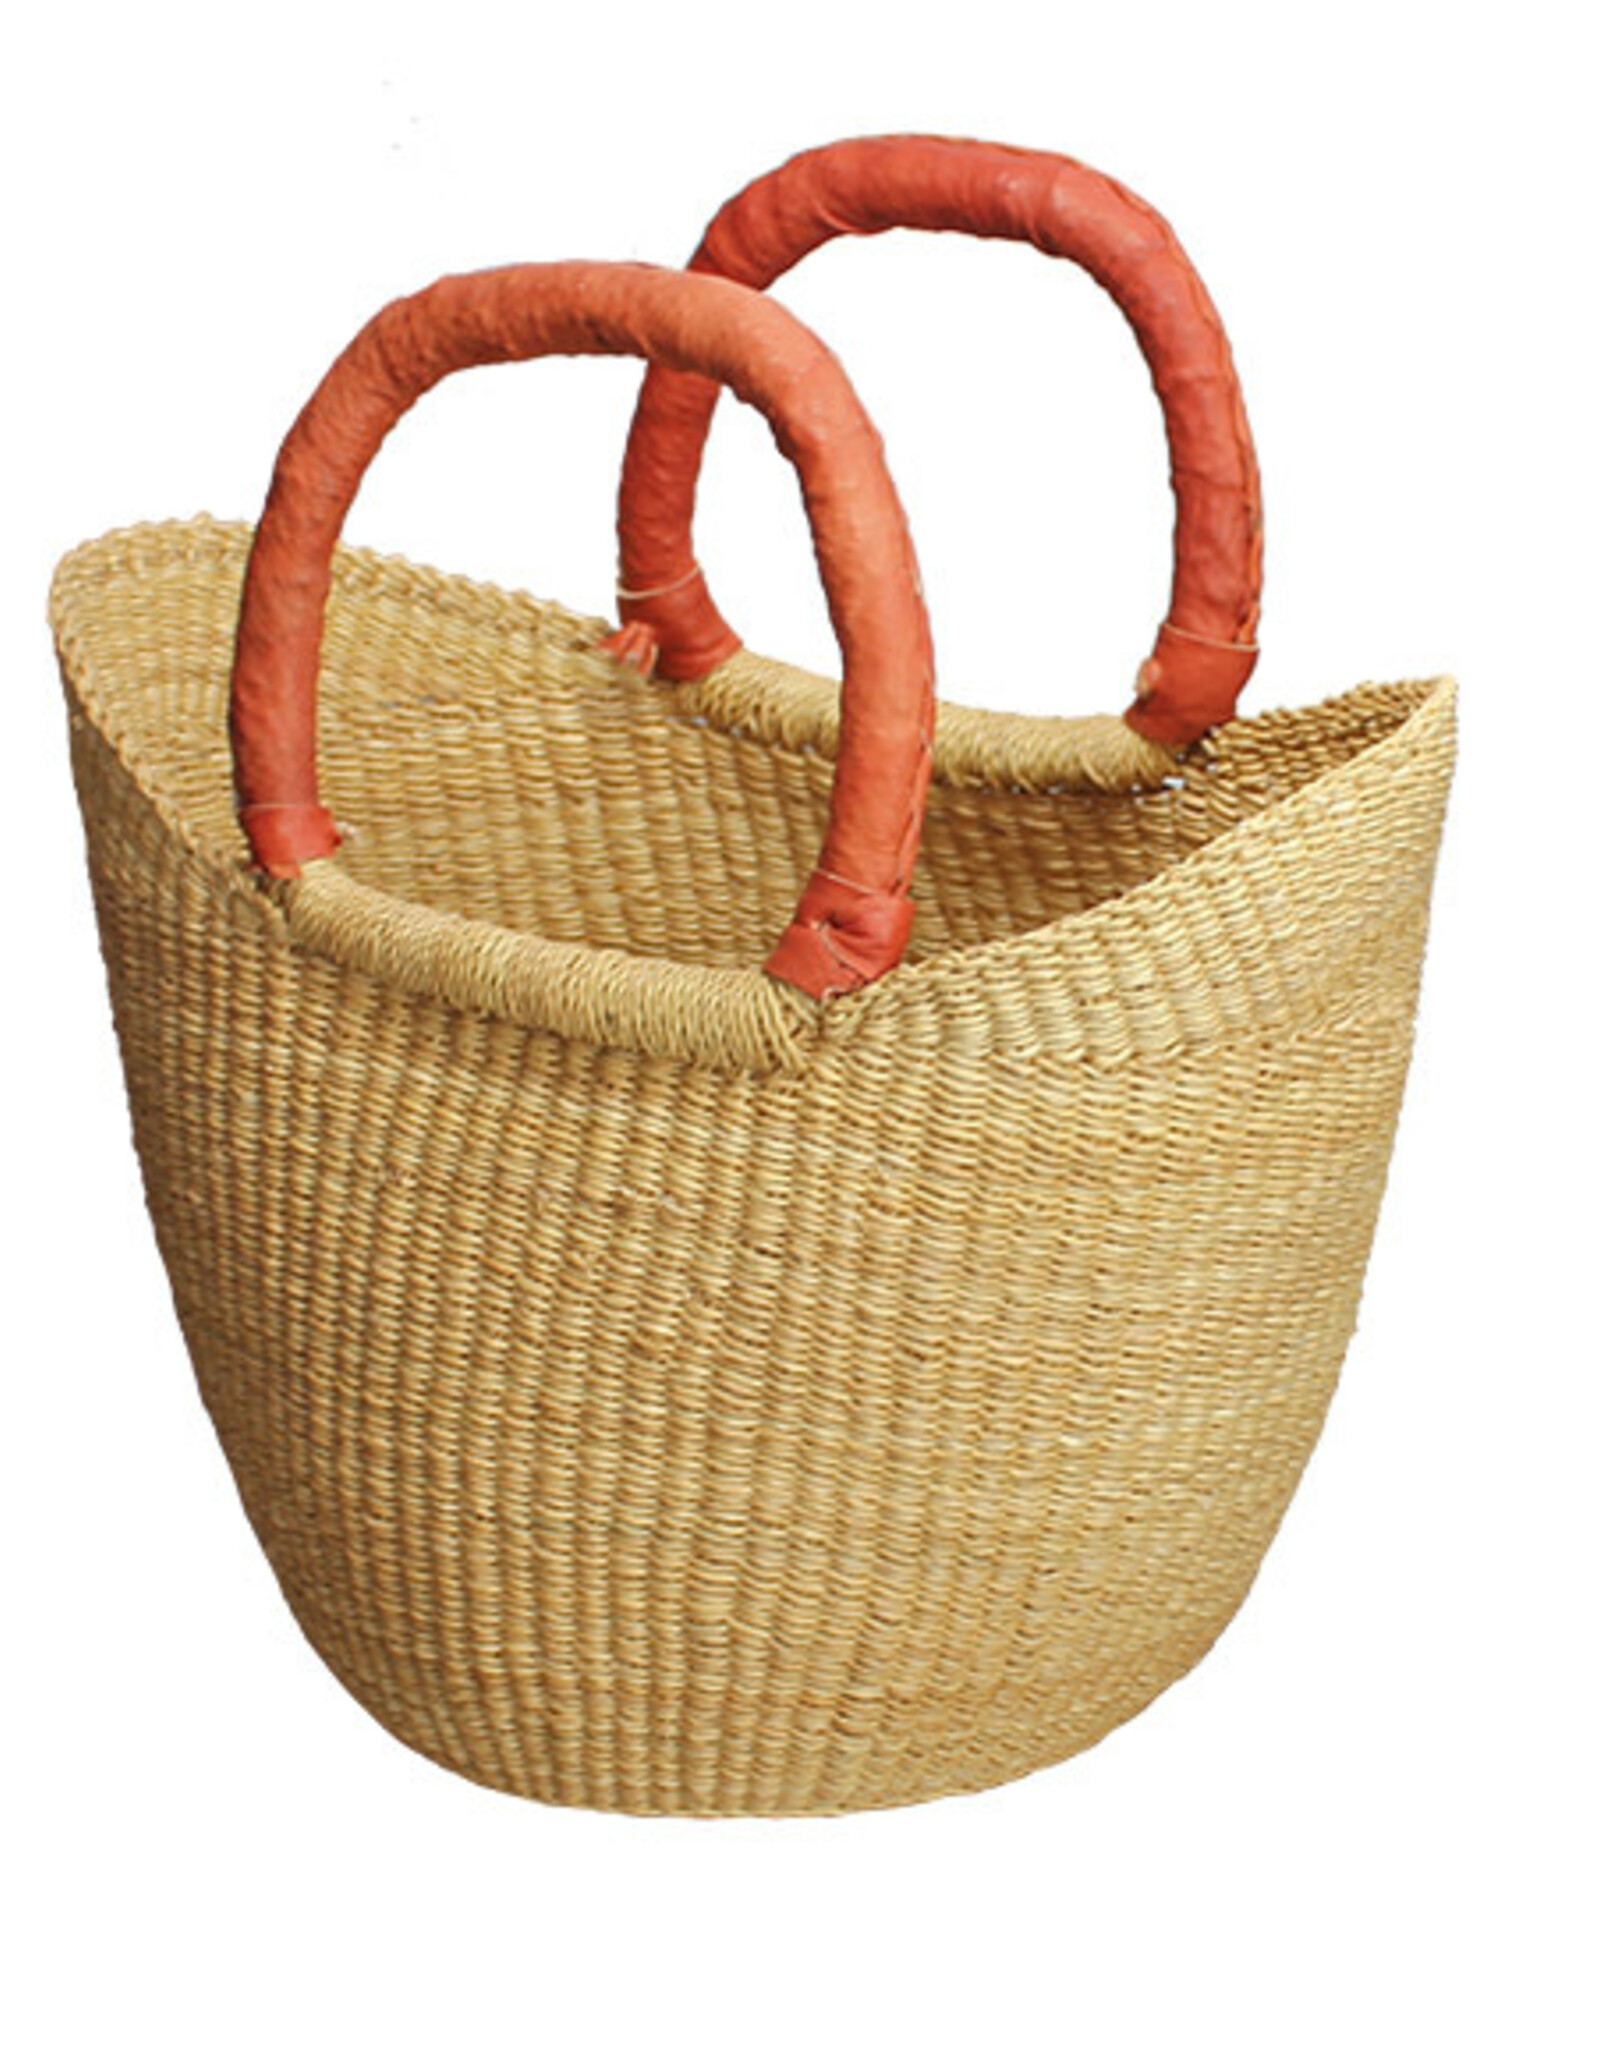 African Market Baskets Mini Shopping Tote (Assorted Colors)